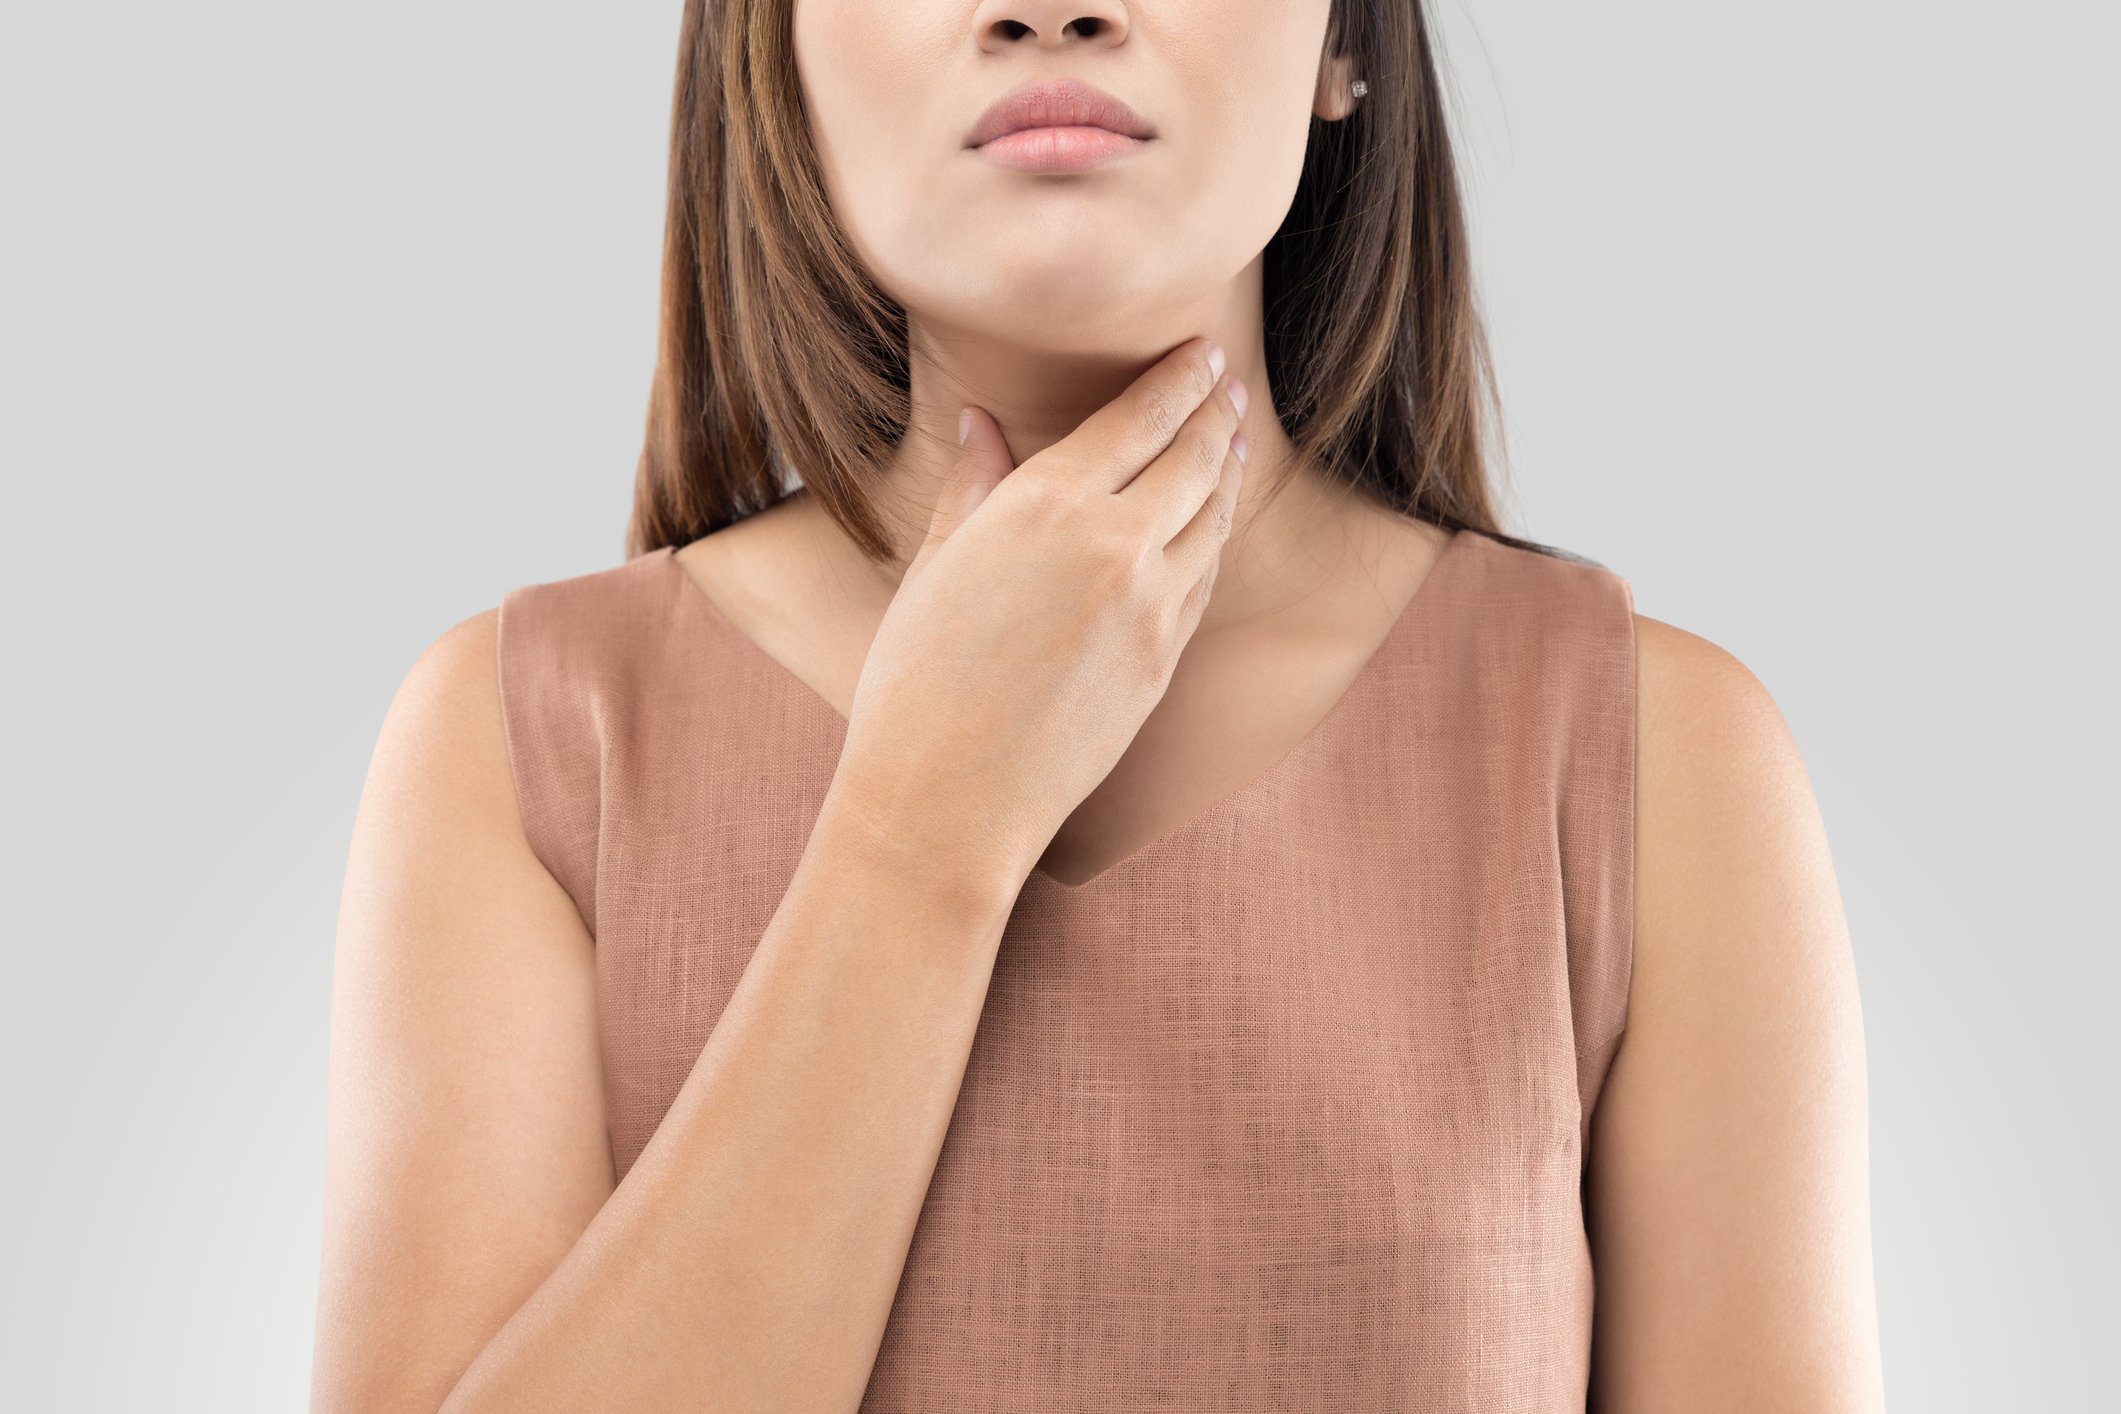 Got a sore throat? Here's what you should – and shouldn't – eat and drink -  National | Globalnews.ca